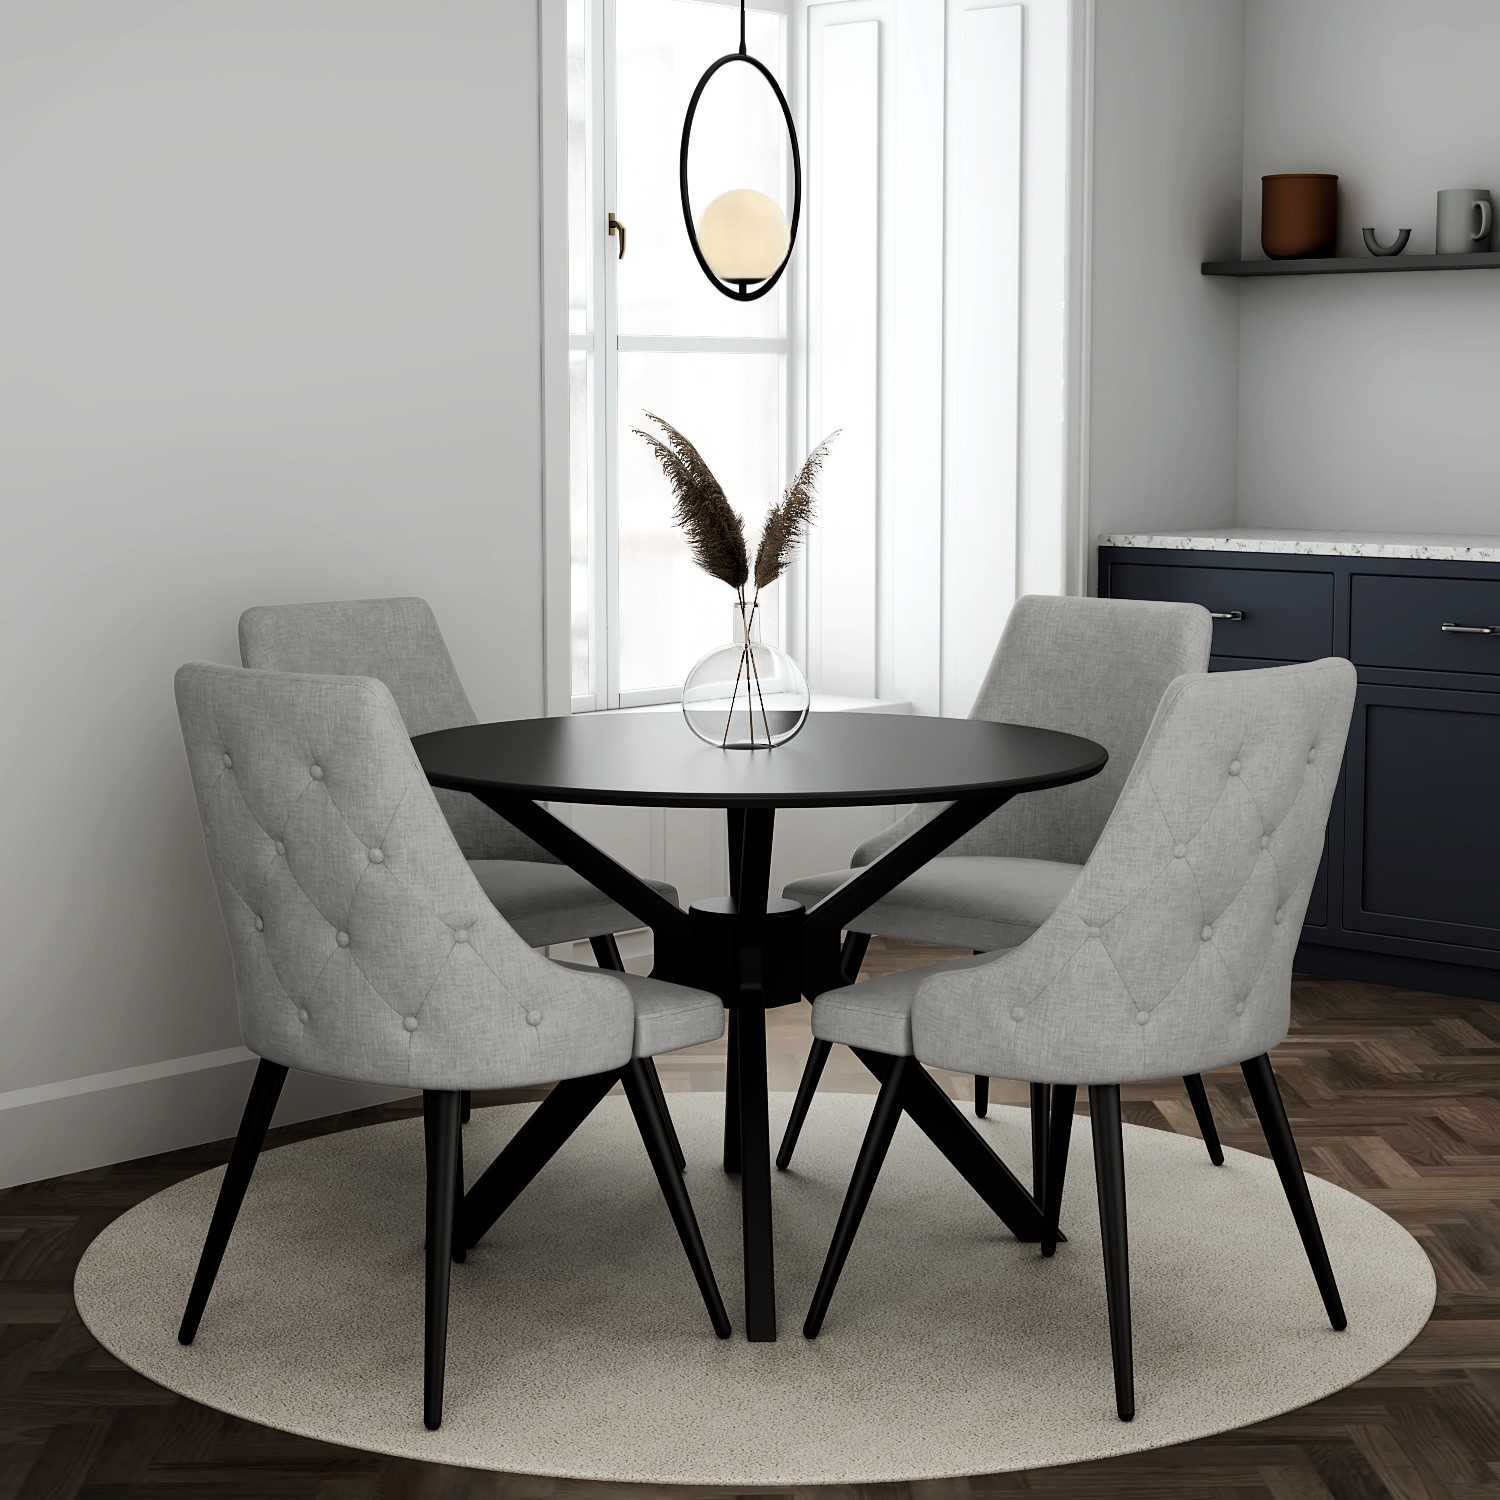 Black Round Dining Table With 4 Grey, Black Round Dining Table And 4 Chairs